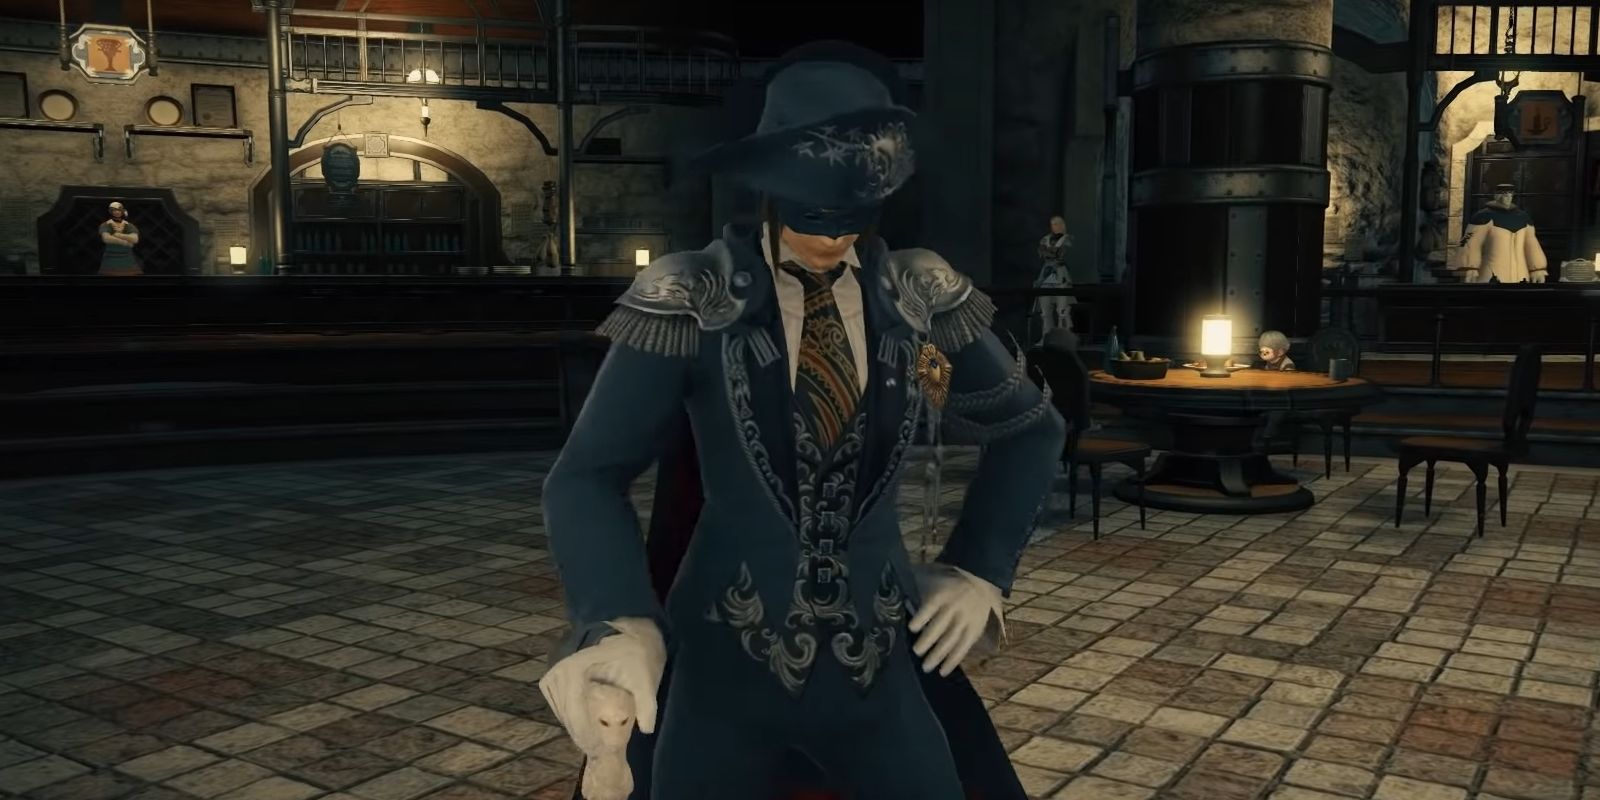 A screenshot of Martyn the Blue Mage from Final Fantasy 14 - wearing a blue over coat, with a shirt and tie plus cane.